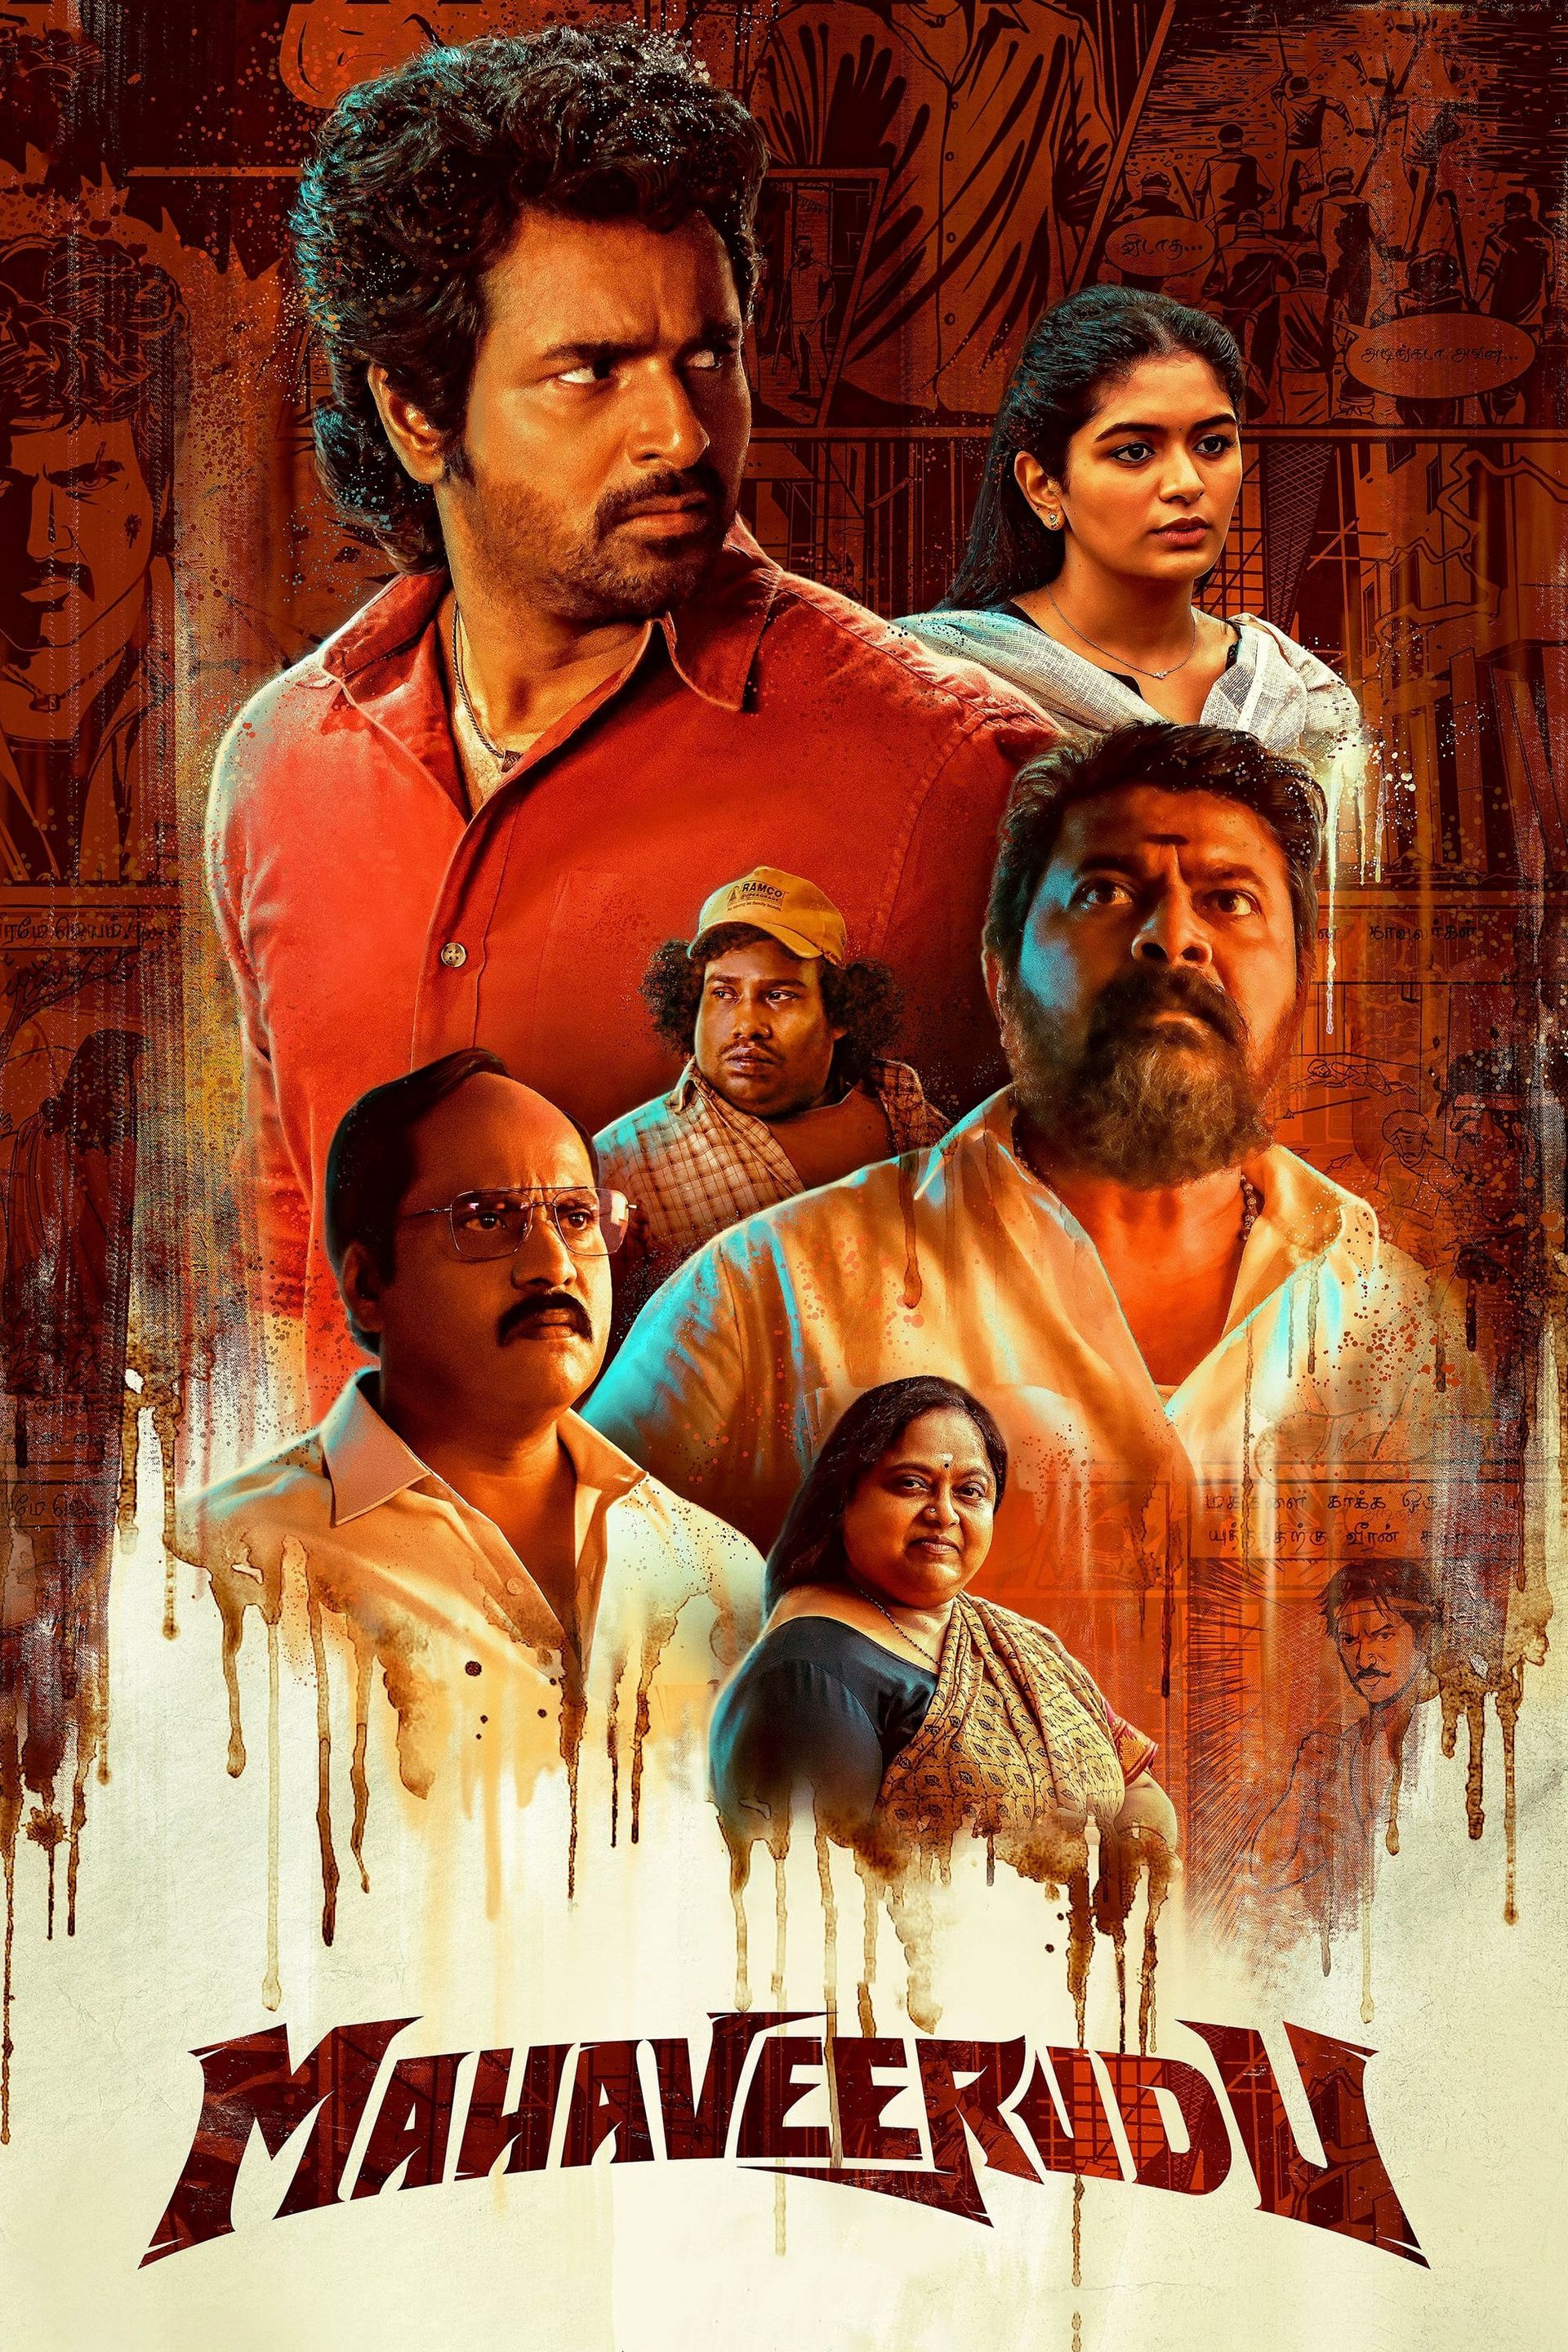 Watch The Four (Tamil Dubbed) Movie Online for Free Anytime